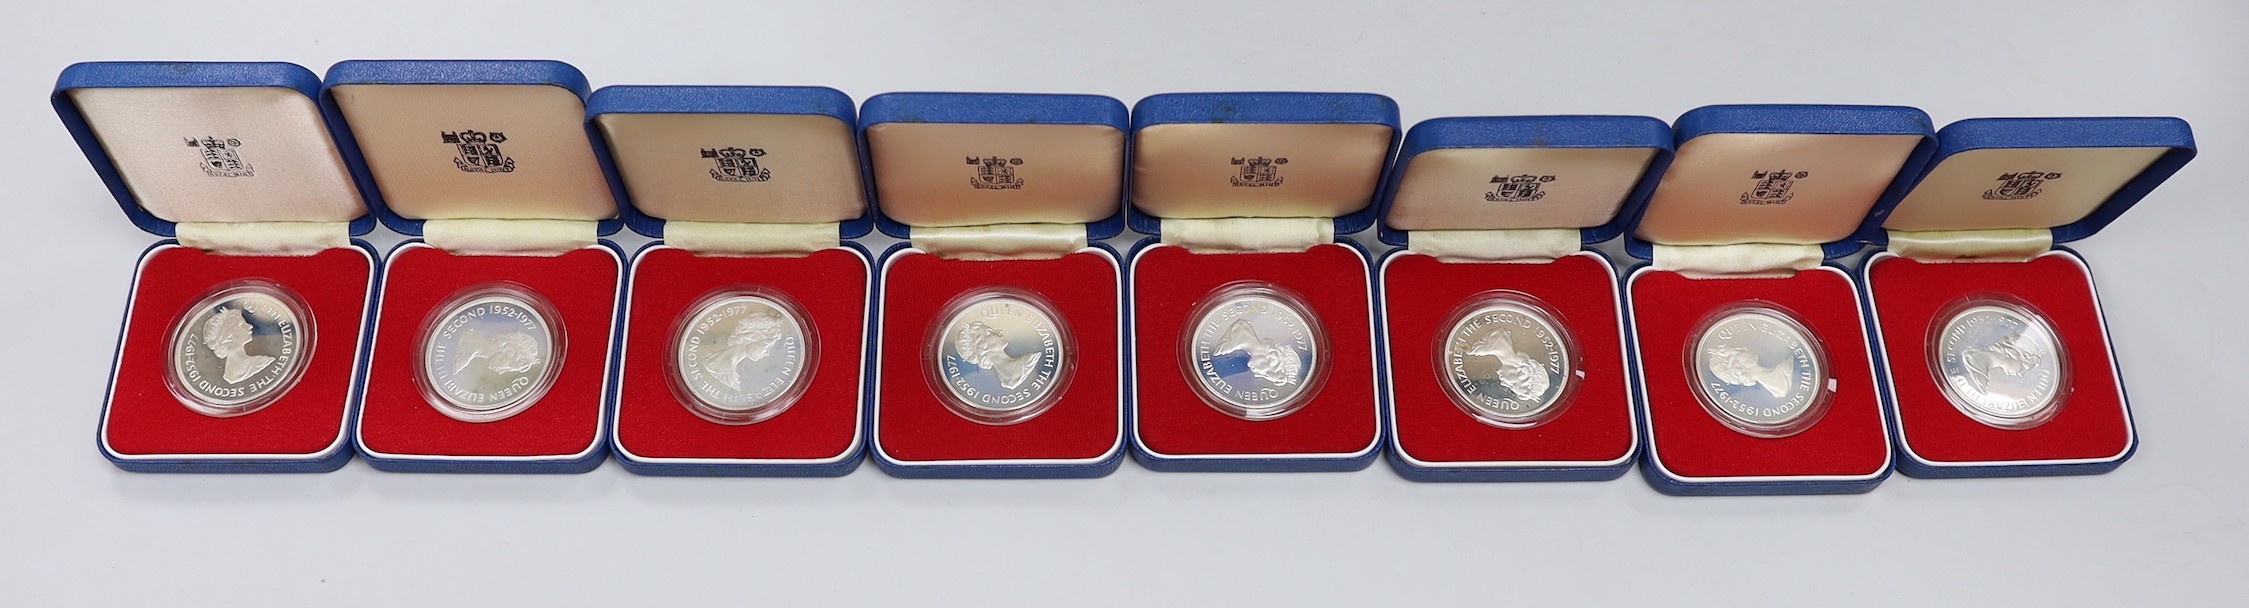 Eight Royal Mint Commonwealth commemorative proof silver crowns                                                                                                                                                             